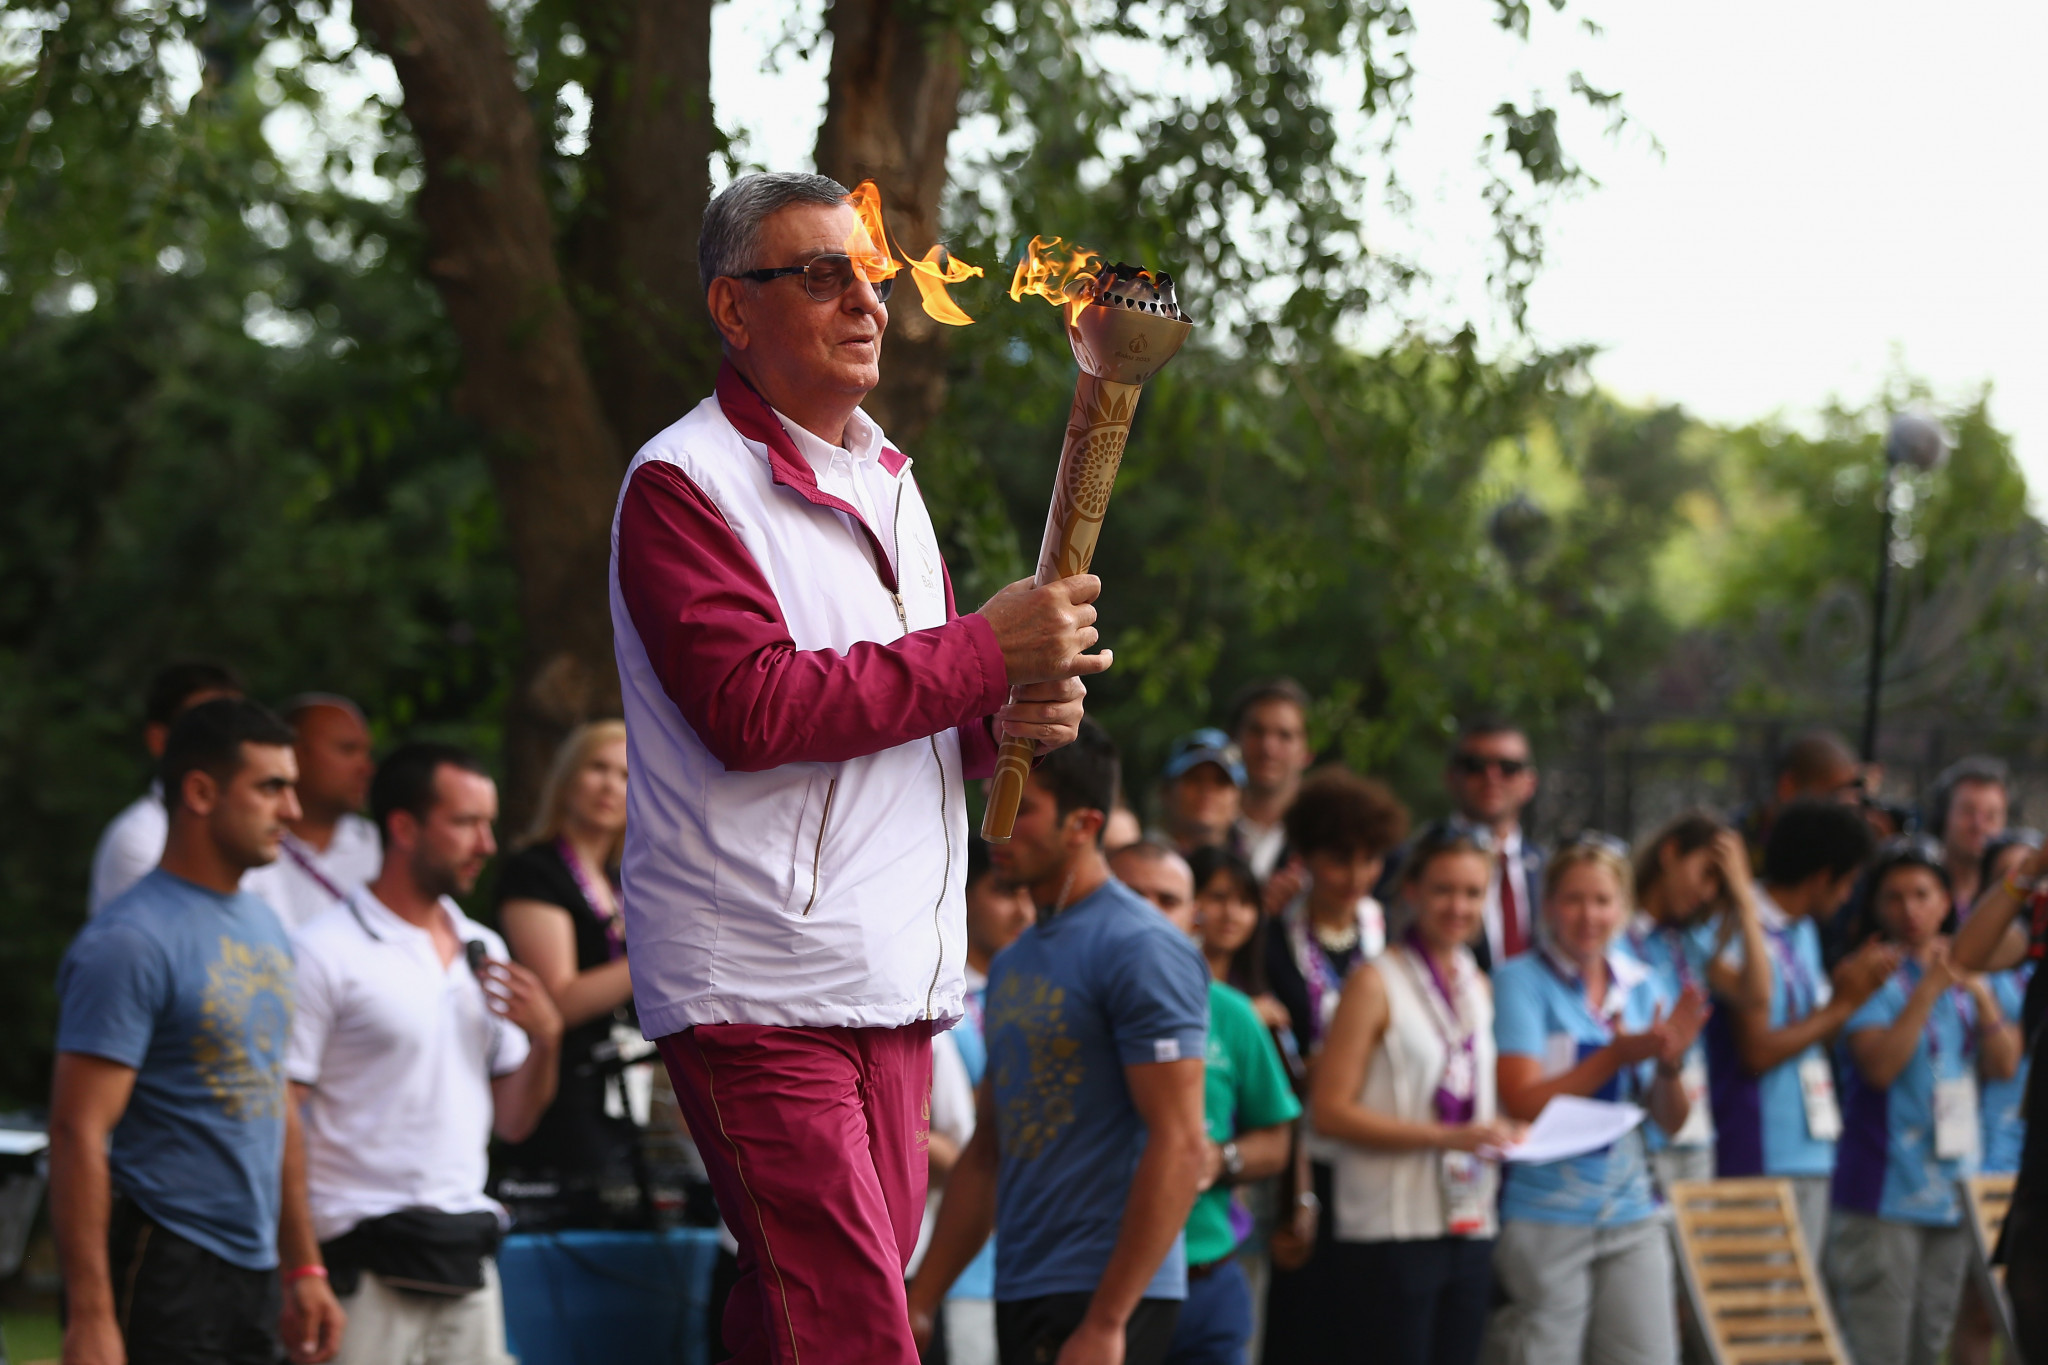 Baku came up with an original approach to their Torch Relay ©Getty Images